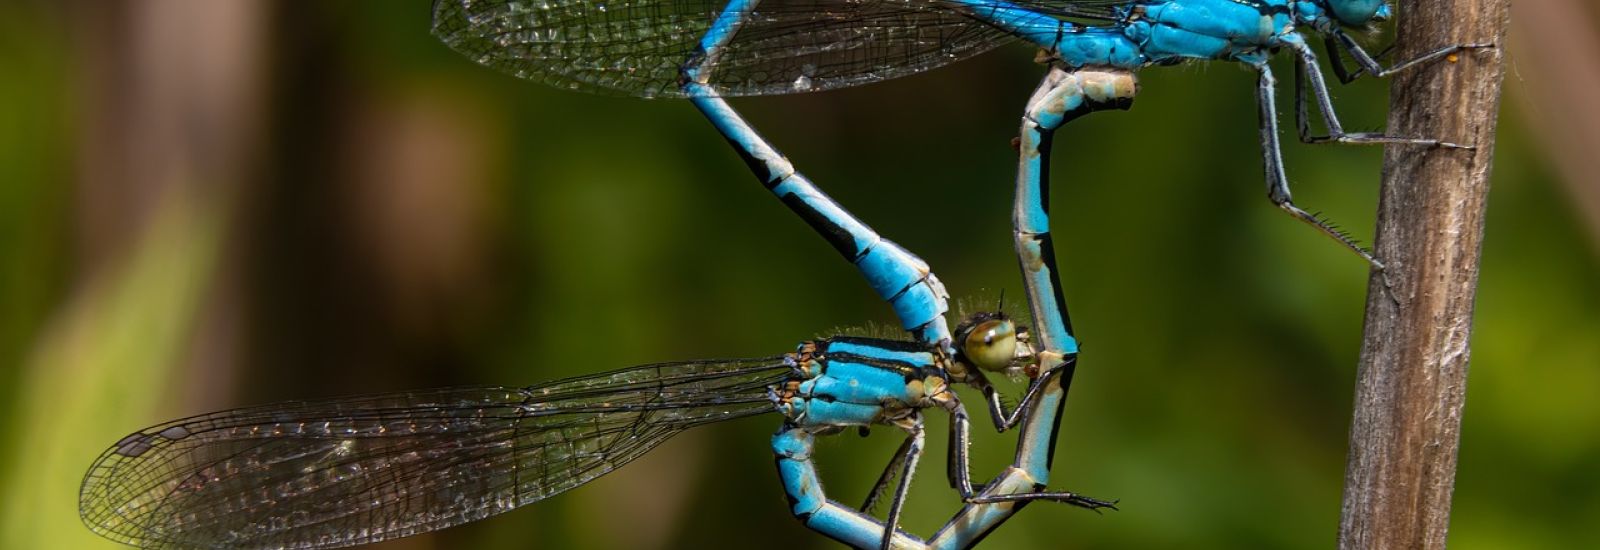 Two Dragon Flies mating, creating the heart shape they are so famous for.